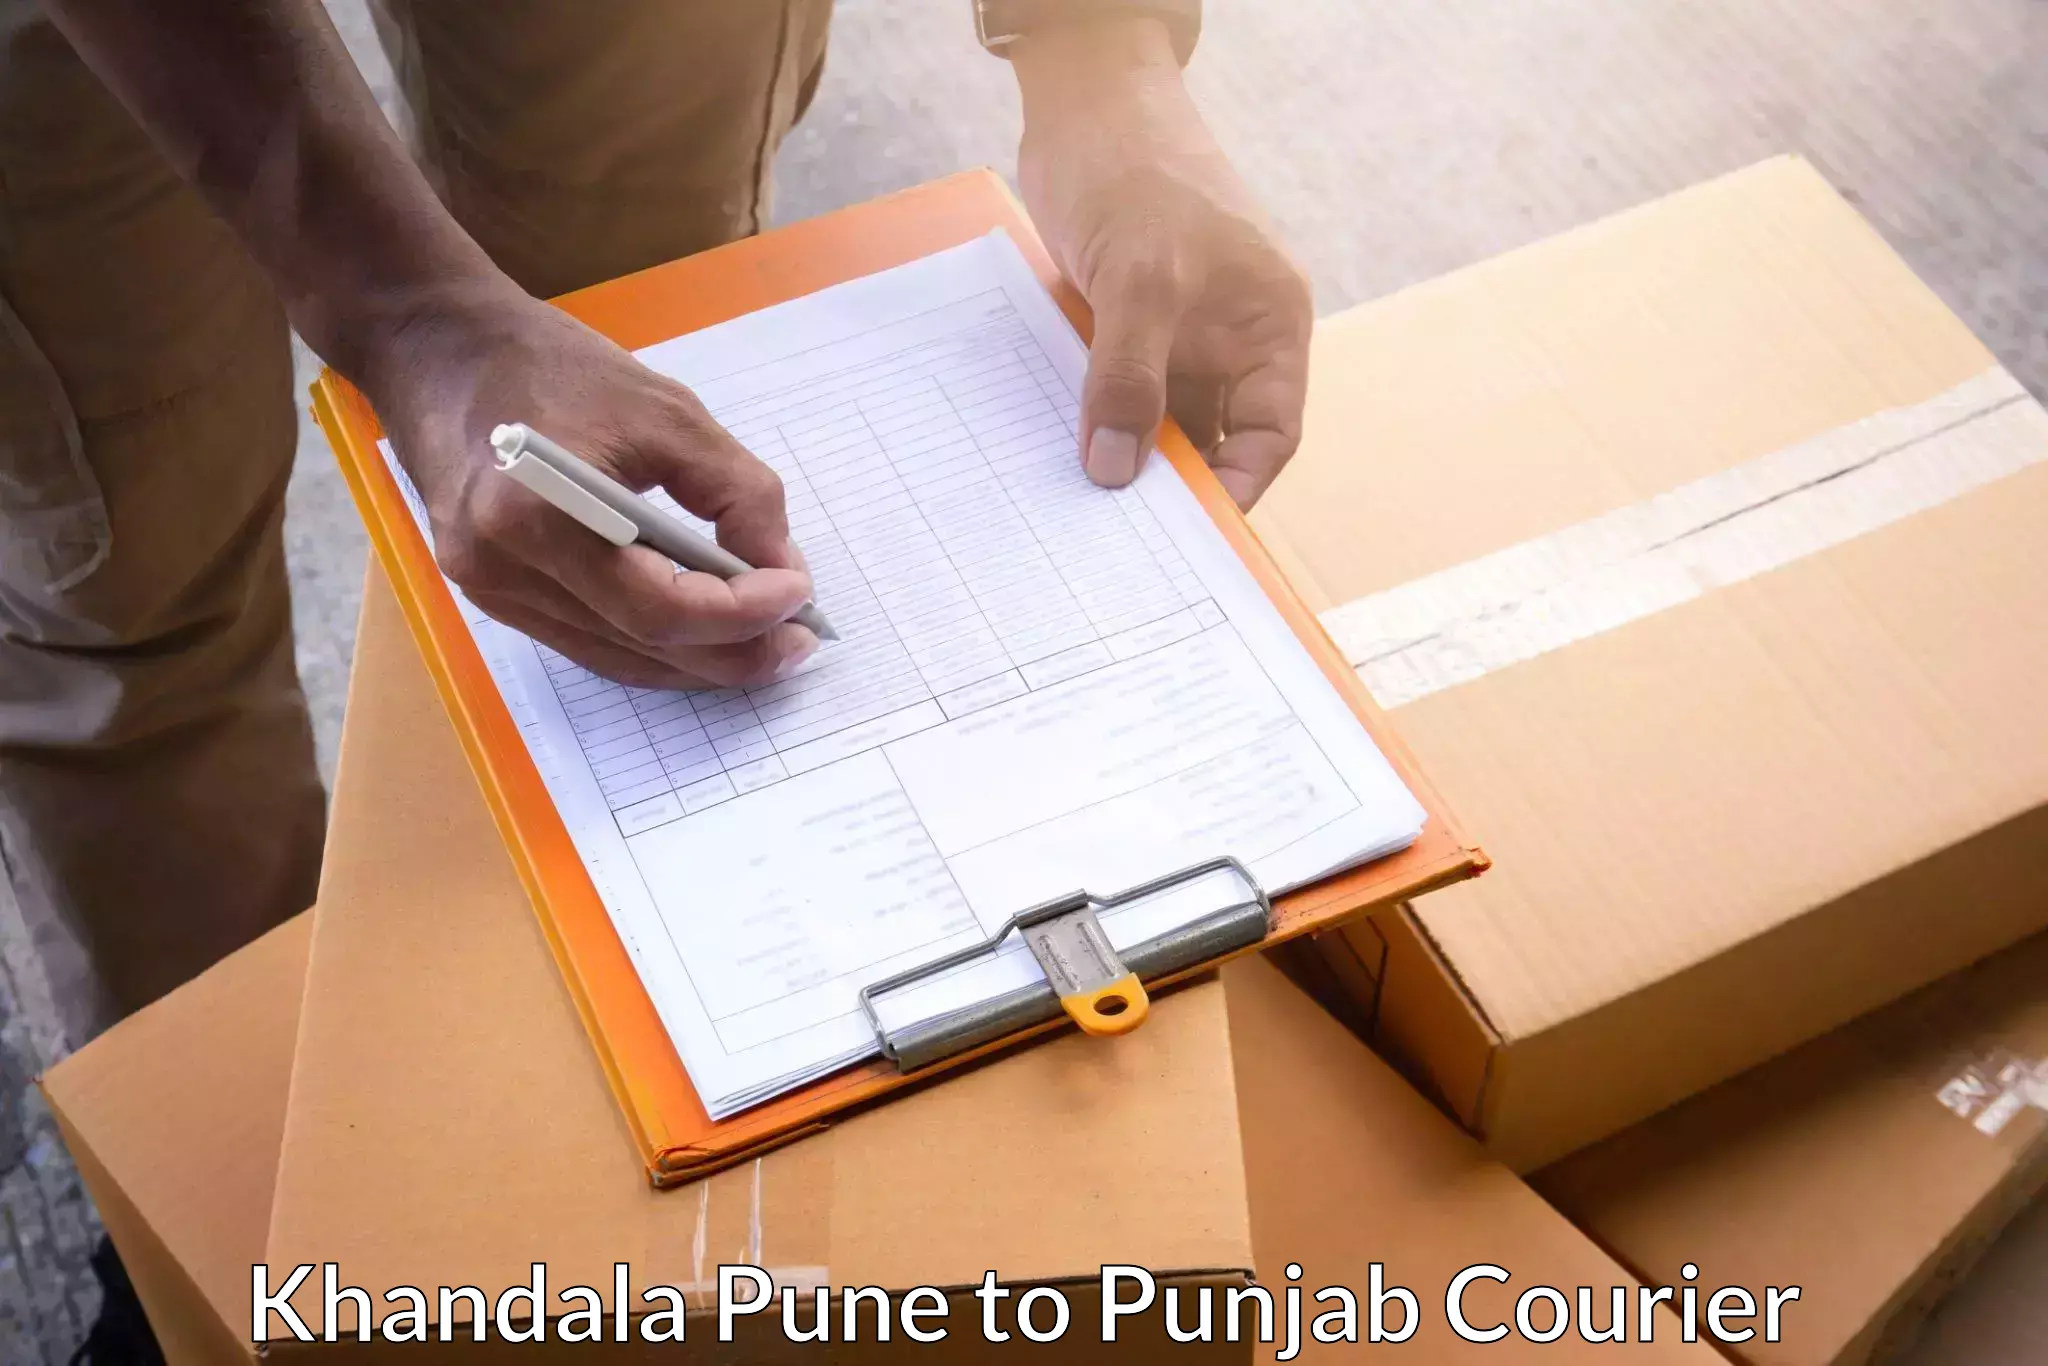 Specialized courier services Khandala Pune to Dinanagar